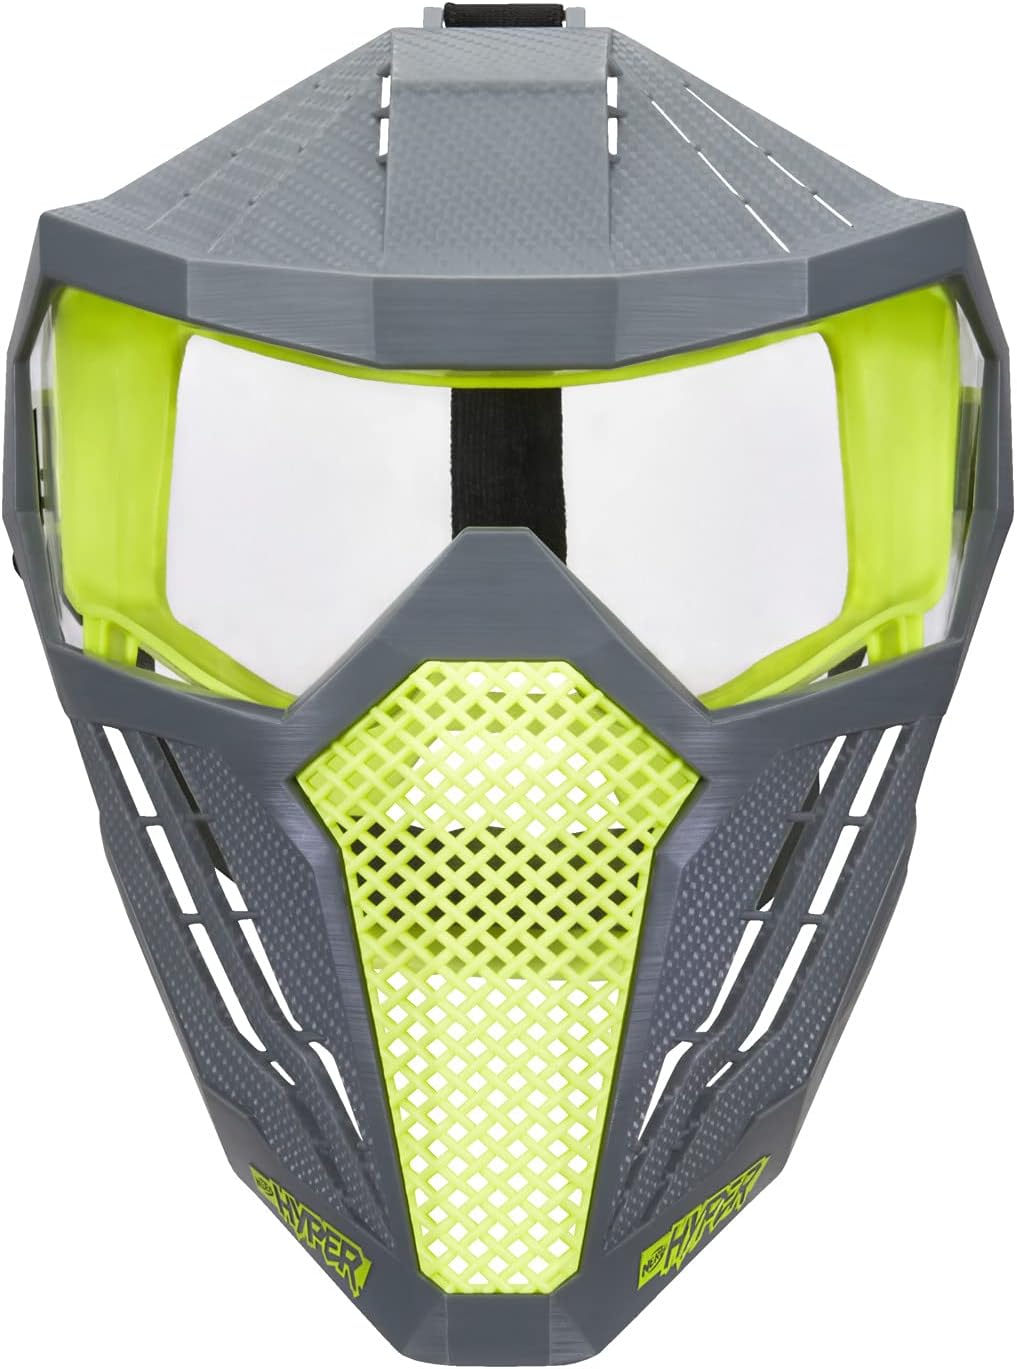 NERF Hyper Face-Mask - Breathable Design, Adjustable Head Strap, Green Team Color - for Teens,-Adults